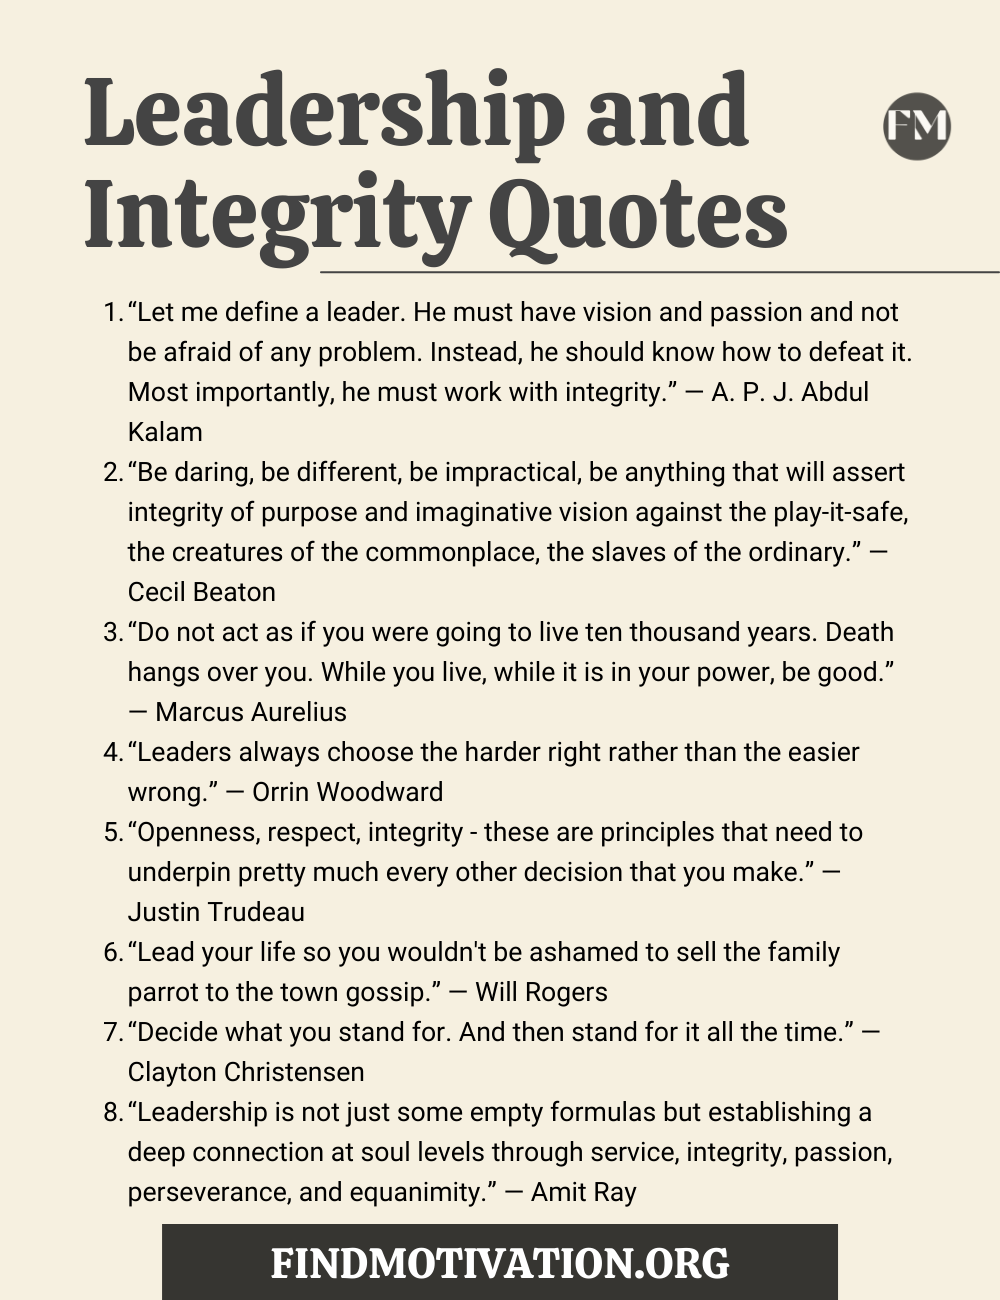 Leadership and Integrity Quotes